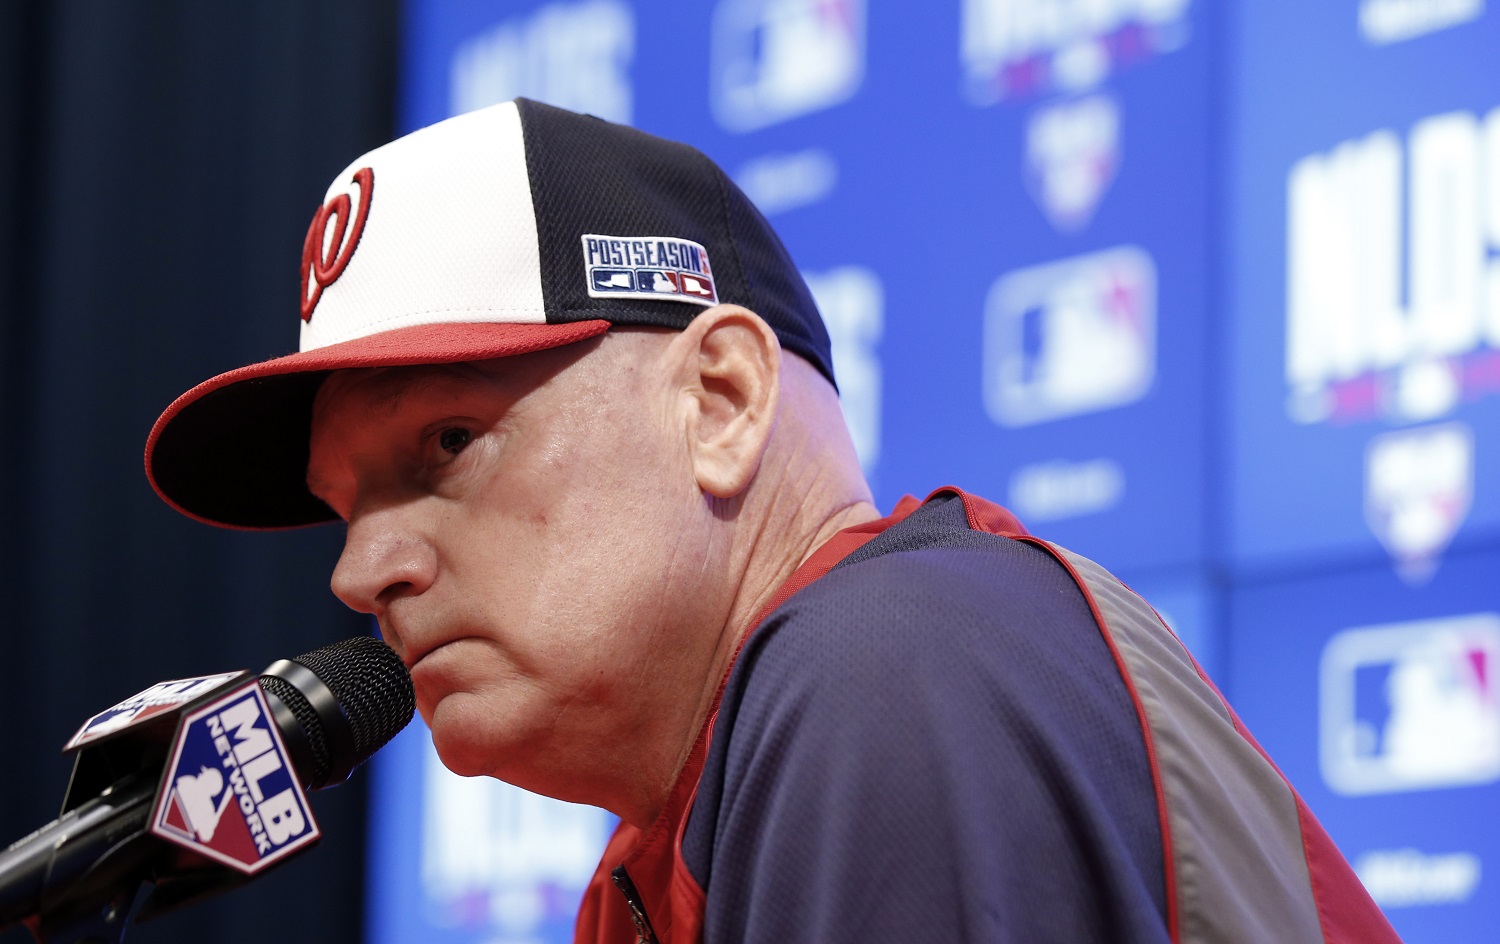 Washington Nationals manager Matt Williams speaks during a media availability before a baseball workout at Nationals Park, Thursday, Oct. 2, 2014, in Washington.  It was announced that Stephen Strasburg will pitch on Friday in Game 1 of the NL Division Series against the San Francisco Giants. (AP Photo/Alex Brandon)